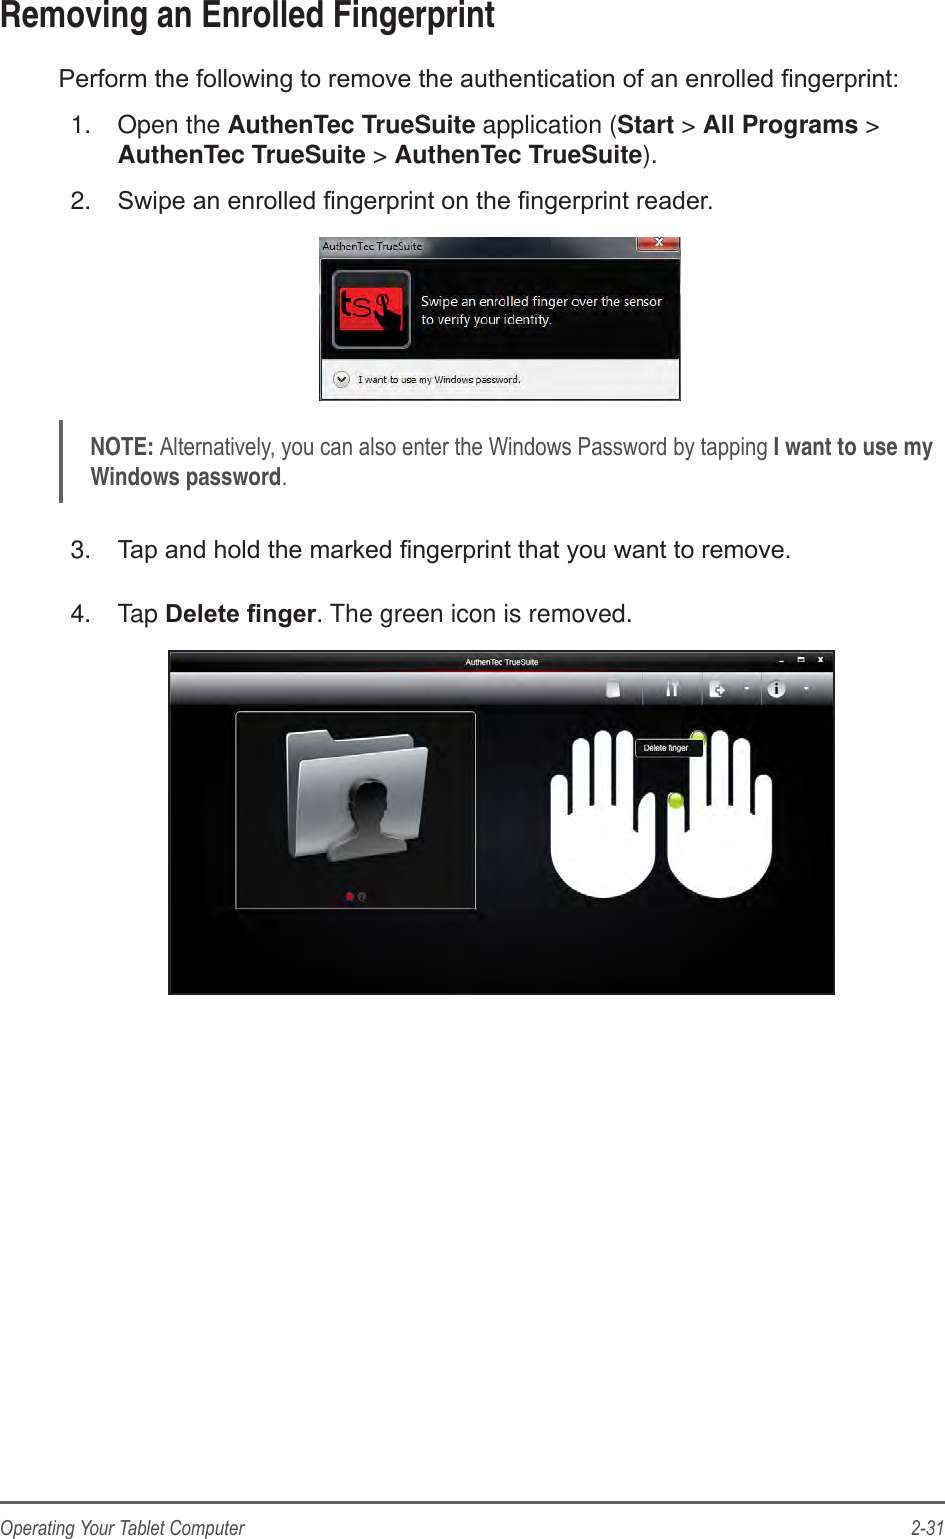 2-31Operating Your Tablet ComputerRemoving an Enrolled FingerprintPerform the following to remove the authentication of an enrolled ngerprint:1.  Open the AuthenTec TrueSuite application (Start &gt; All Programs &gt; AuthenTec TrueSuite &gt; AuthenTec TrueSuite).2.  Swipe an enrolled ngerprint on the ngerprint reader.NOTE: Alternatively, you can also enter the Windows Password by tapping I want to use my Windows password.3.  Tap and hold the marked ngerprint that you want to remove.4.  Tap Deletenger. The green icon is removed.